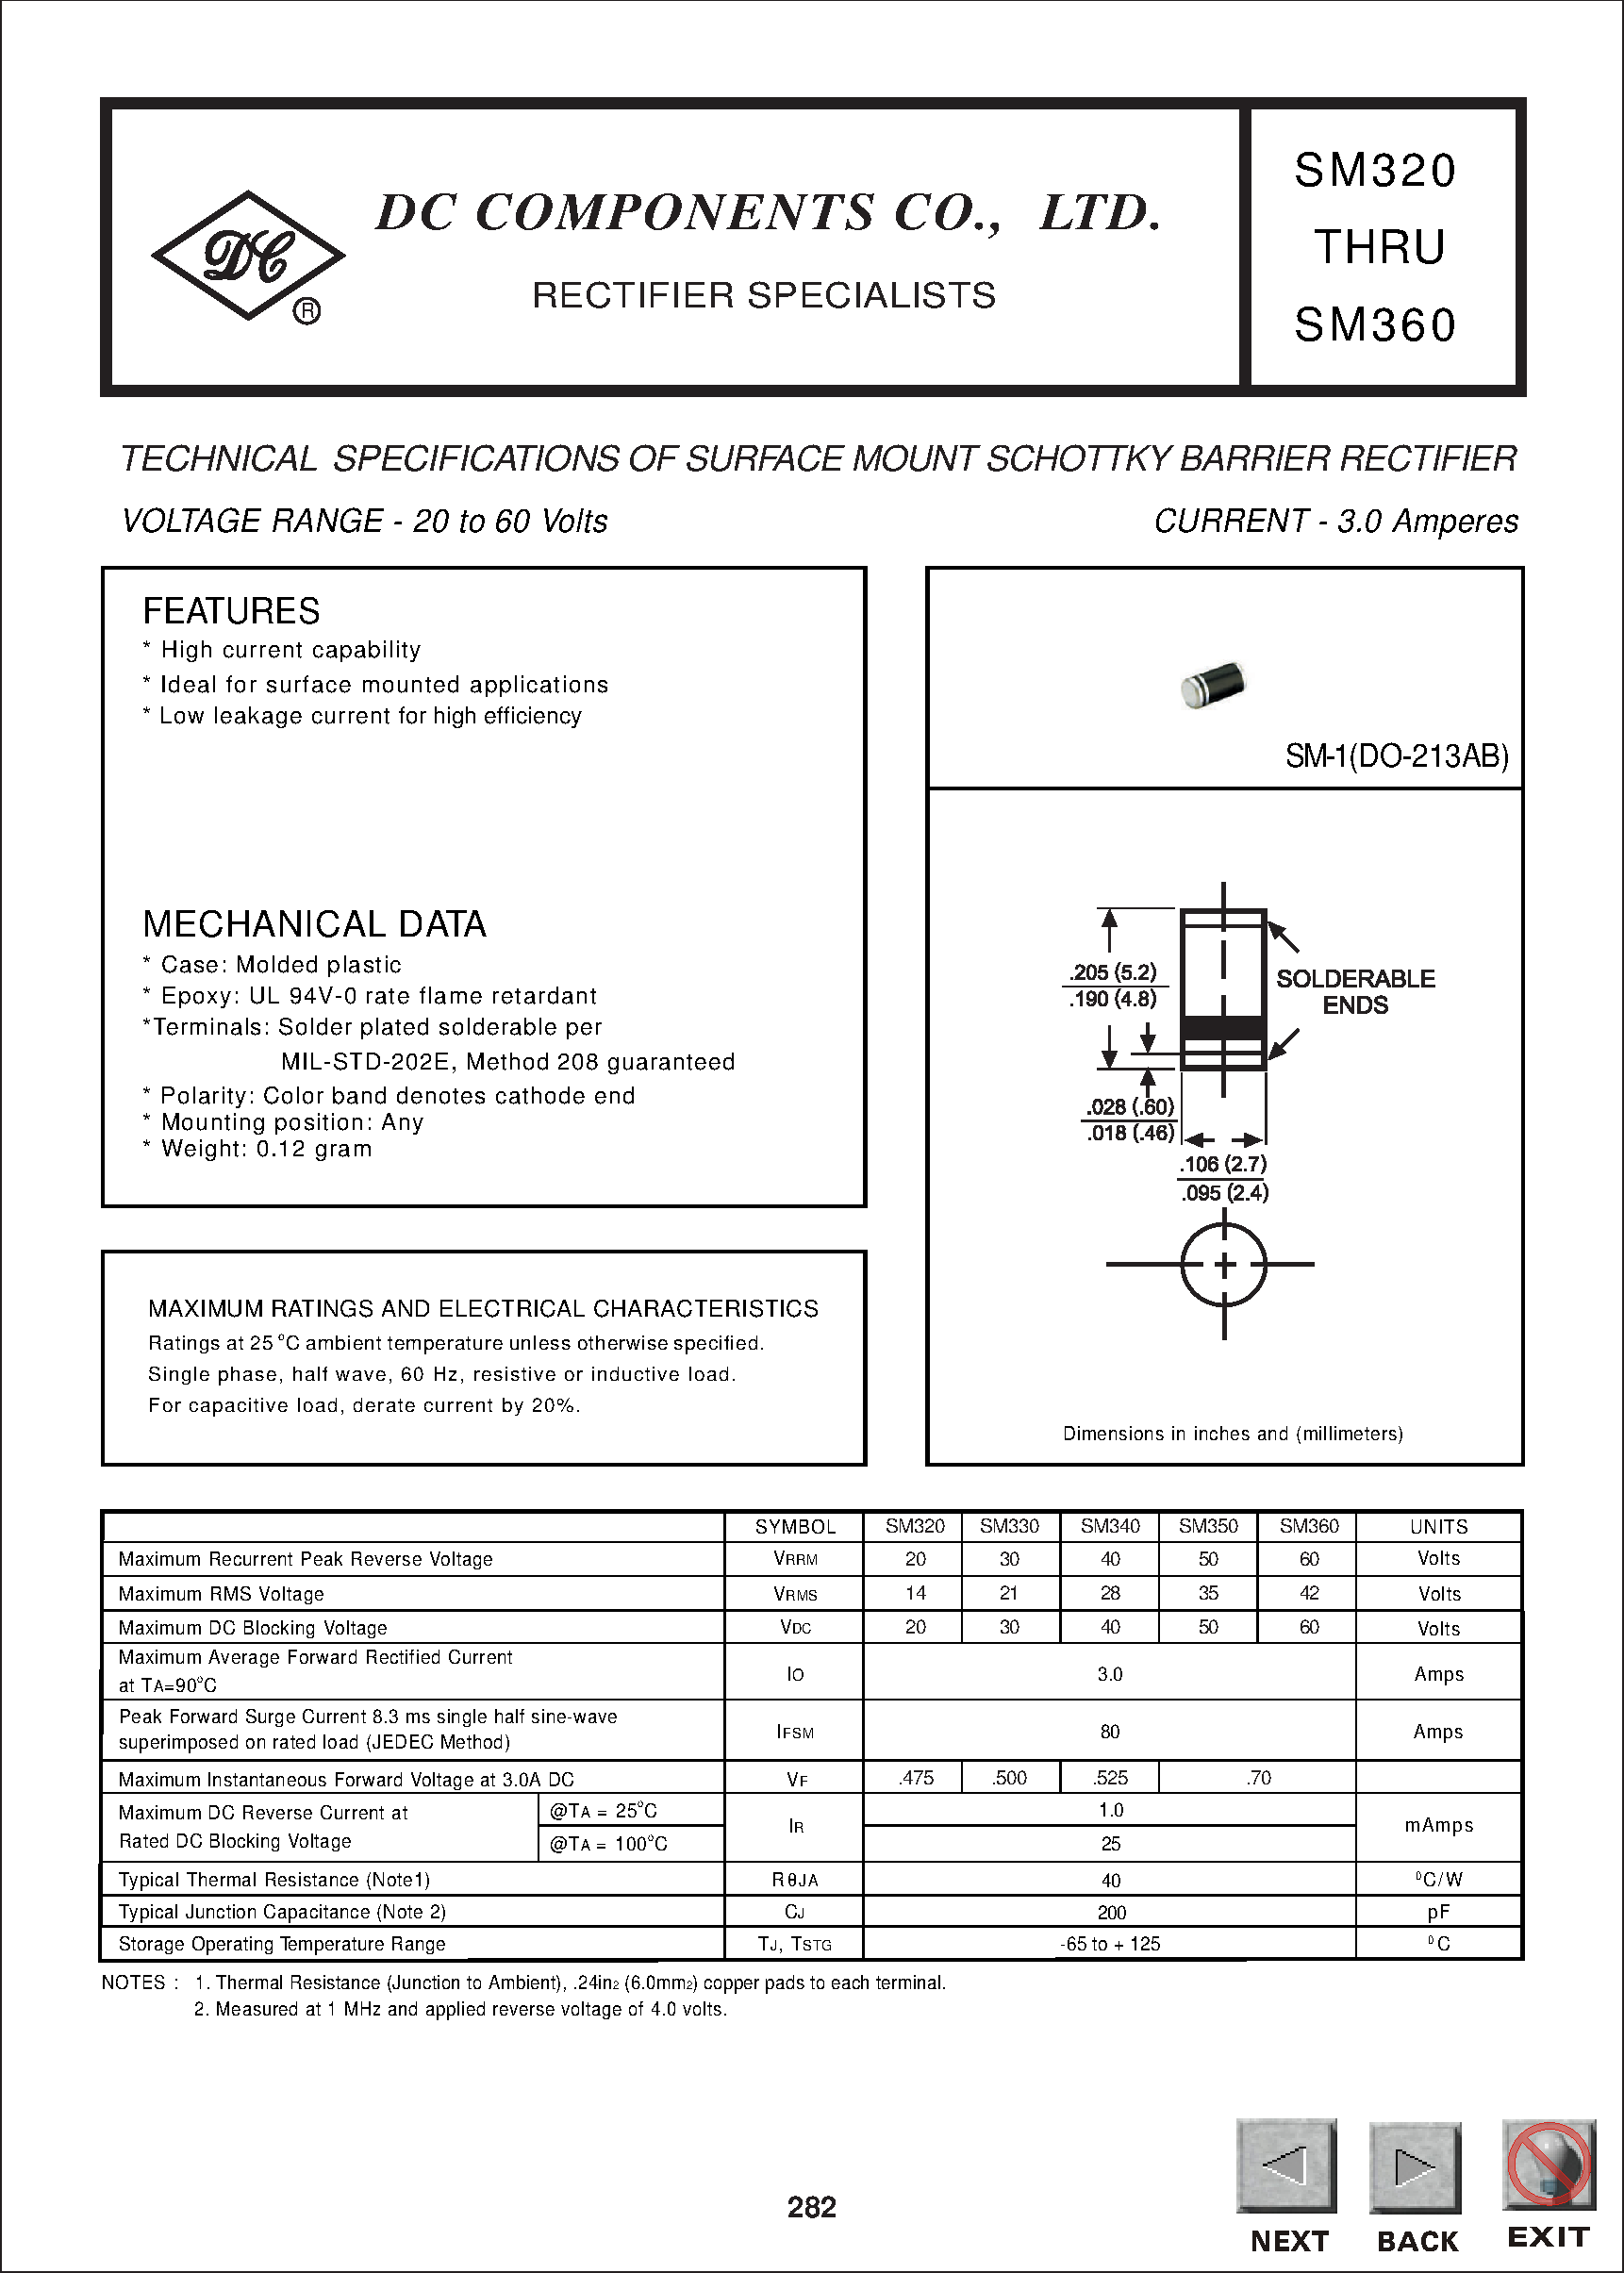 Datasheet SM330 - TECHNICAL SPECIFICATIONS OF SURFACE MOUNT SCHOTTKY BARRIER RECTIFIER page 1